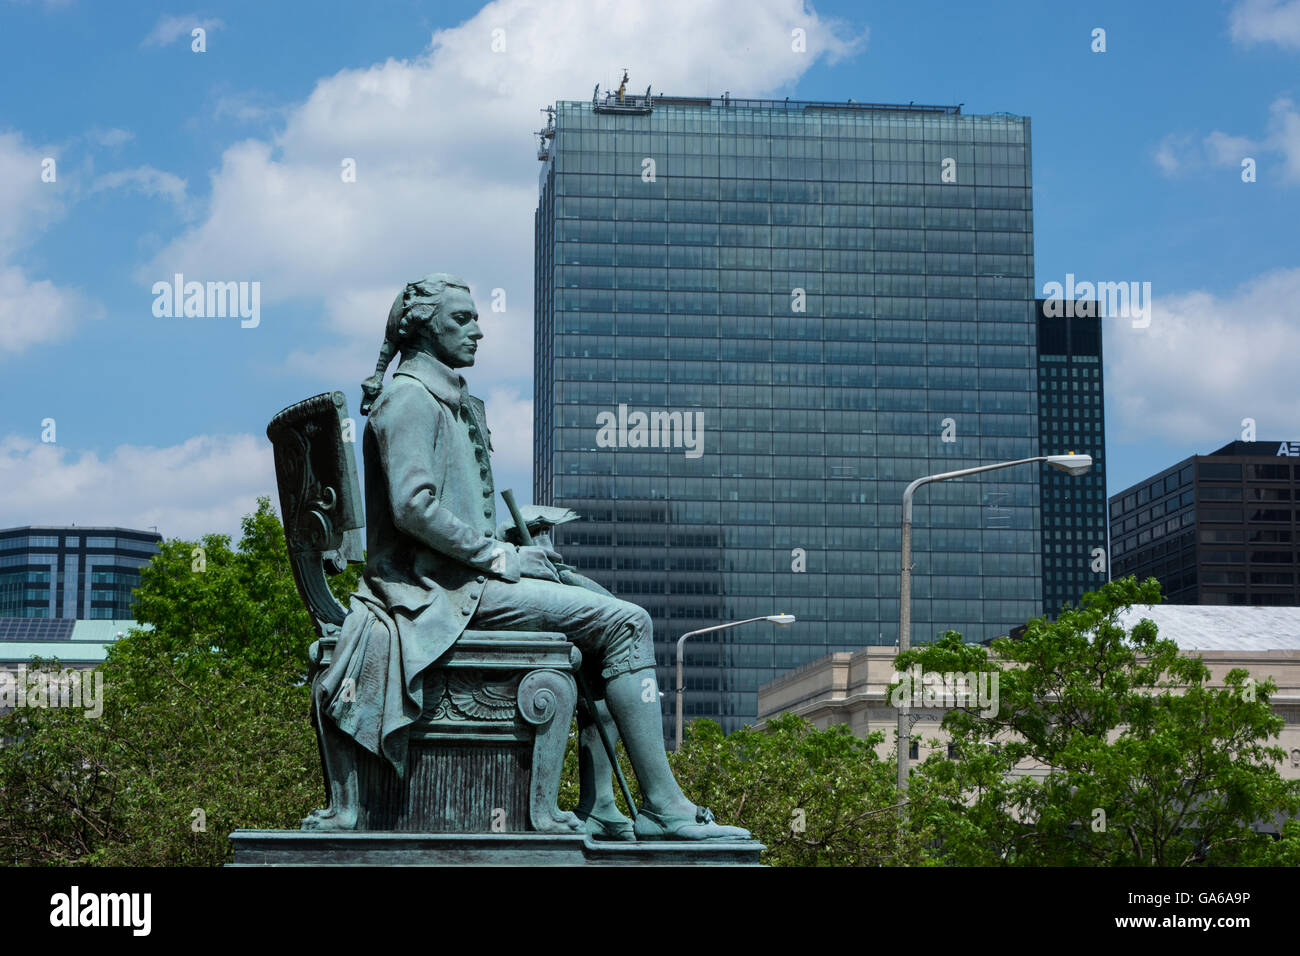 Cleveland Hamilton High Resolution Stock Photography and Images ...